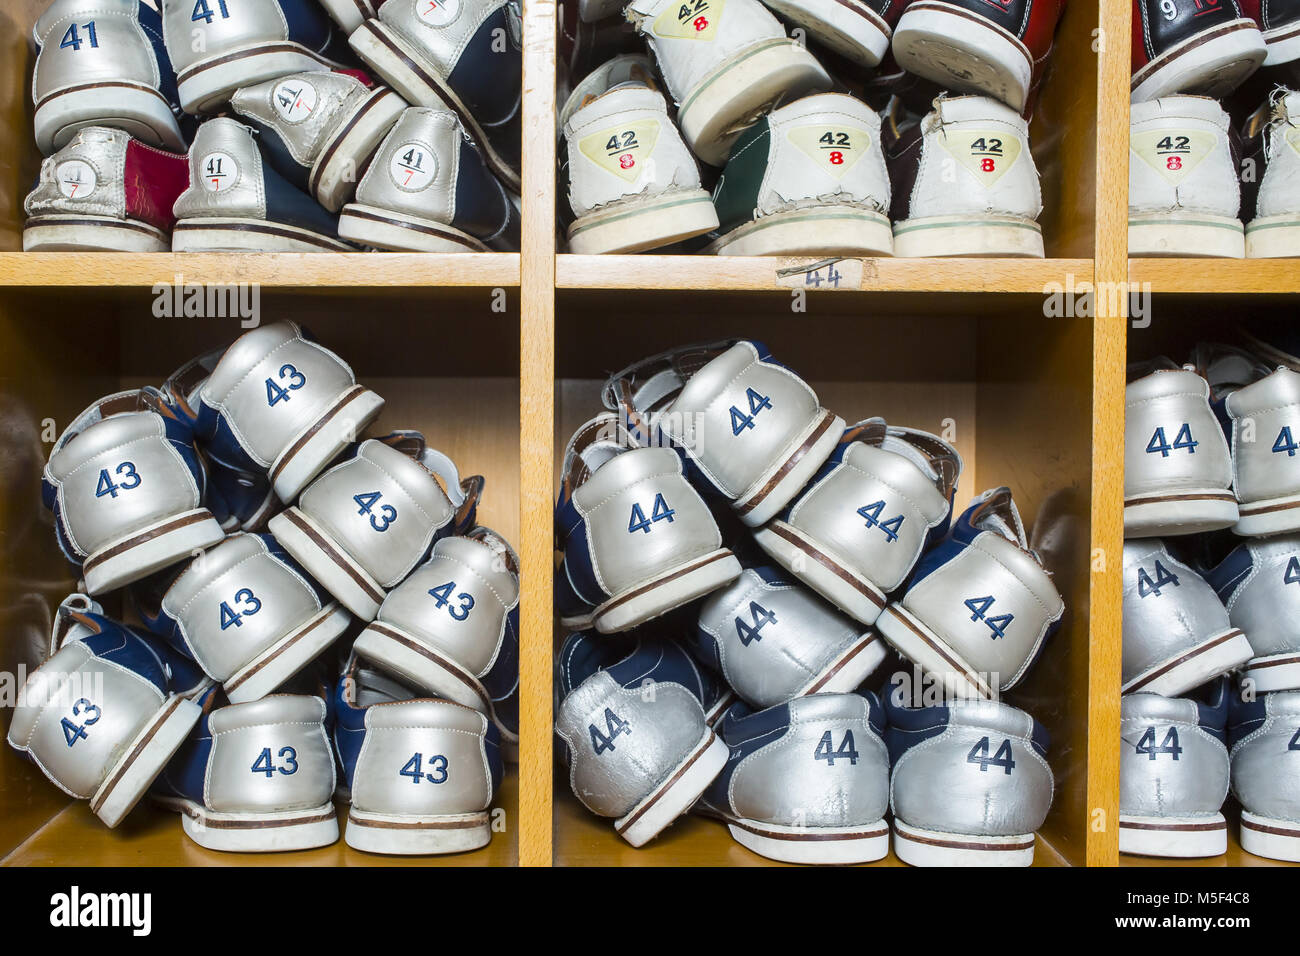 rack with shoes for bowling in different sizes Stock Photo